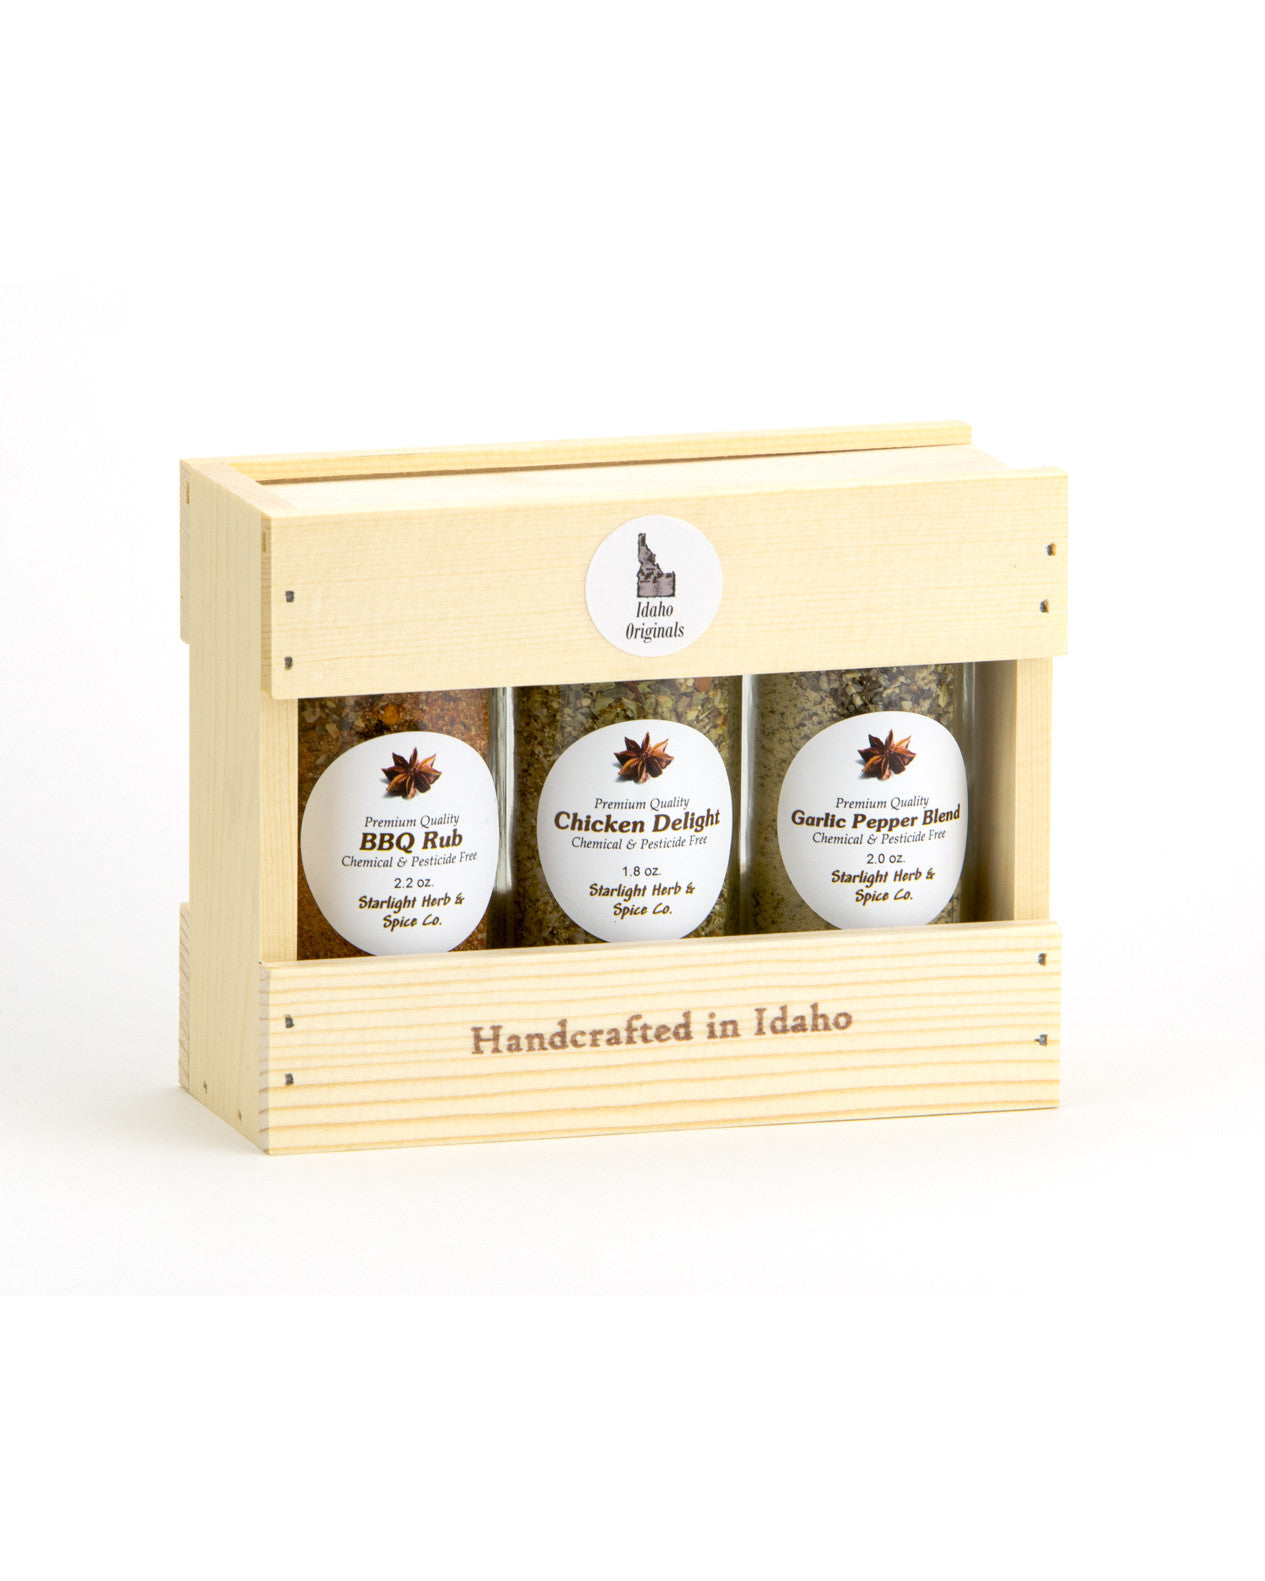 Corporate Gifts: Grilling Spice 3 Jar Box